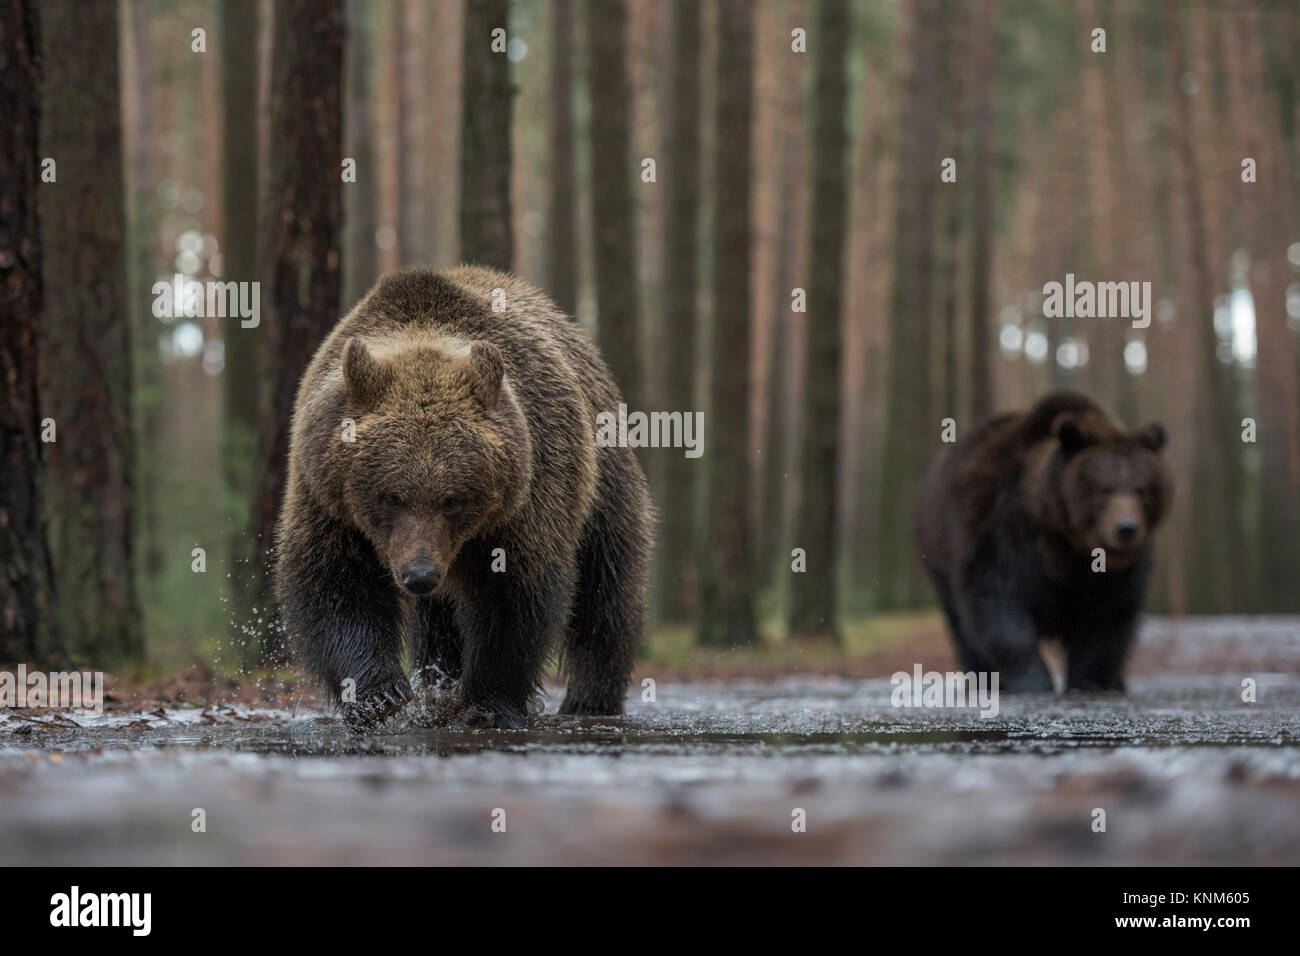 Brown Bear / Bears ( Ursus arctos ), walking through shallow the water of an ice covered puddle, exploring the frozen water, looks funny, Europe. Stock Photo